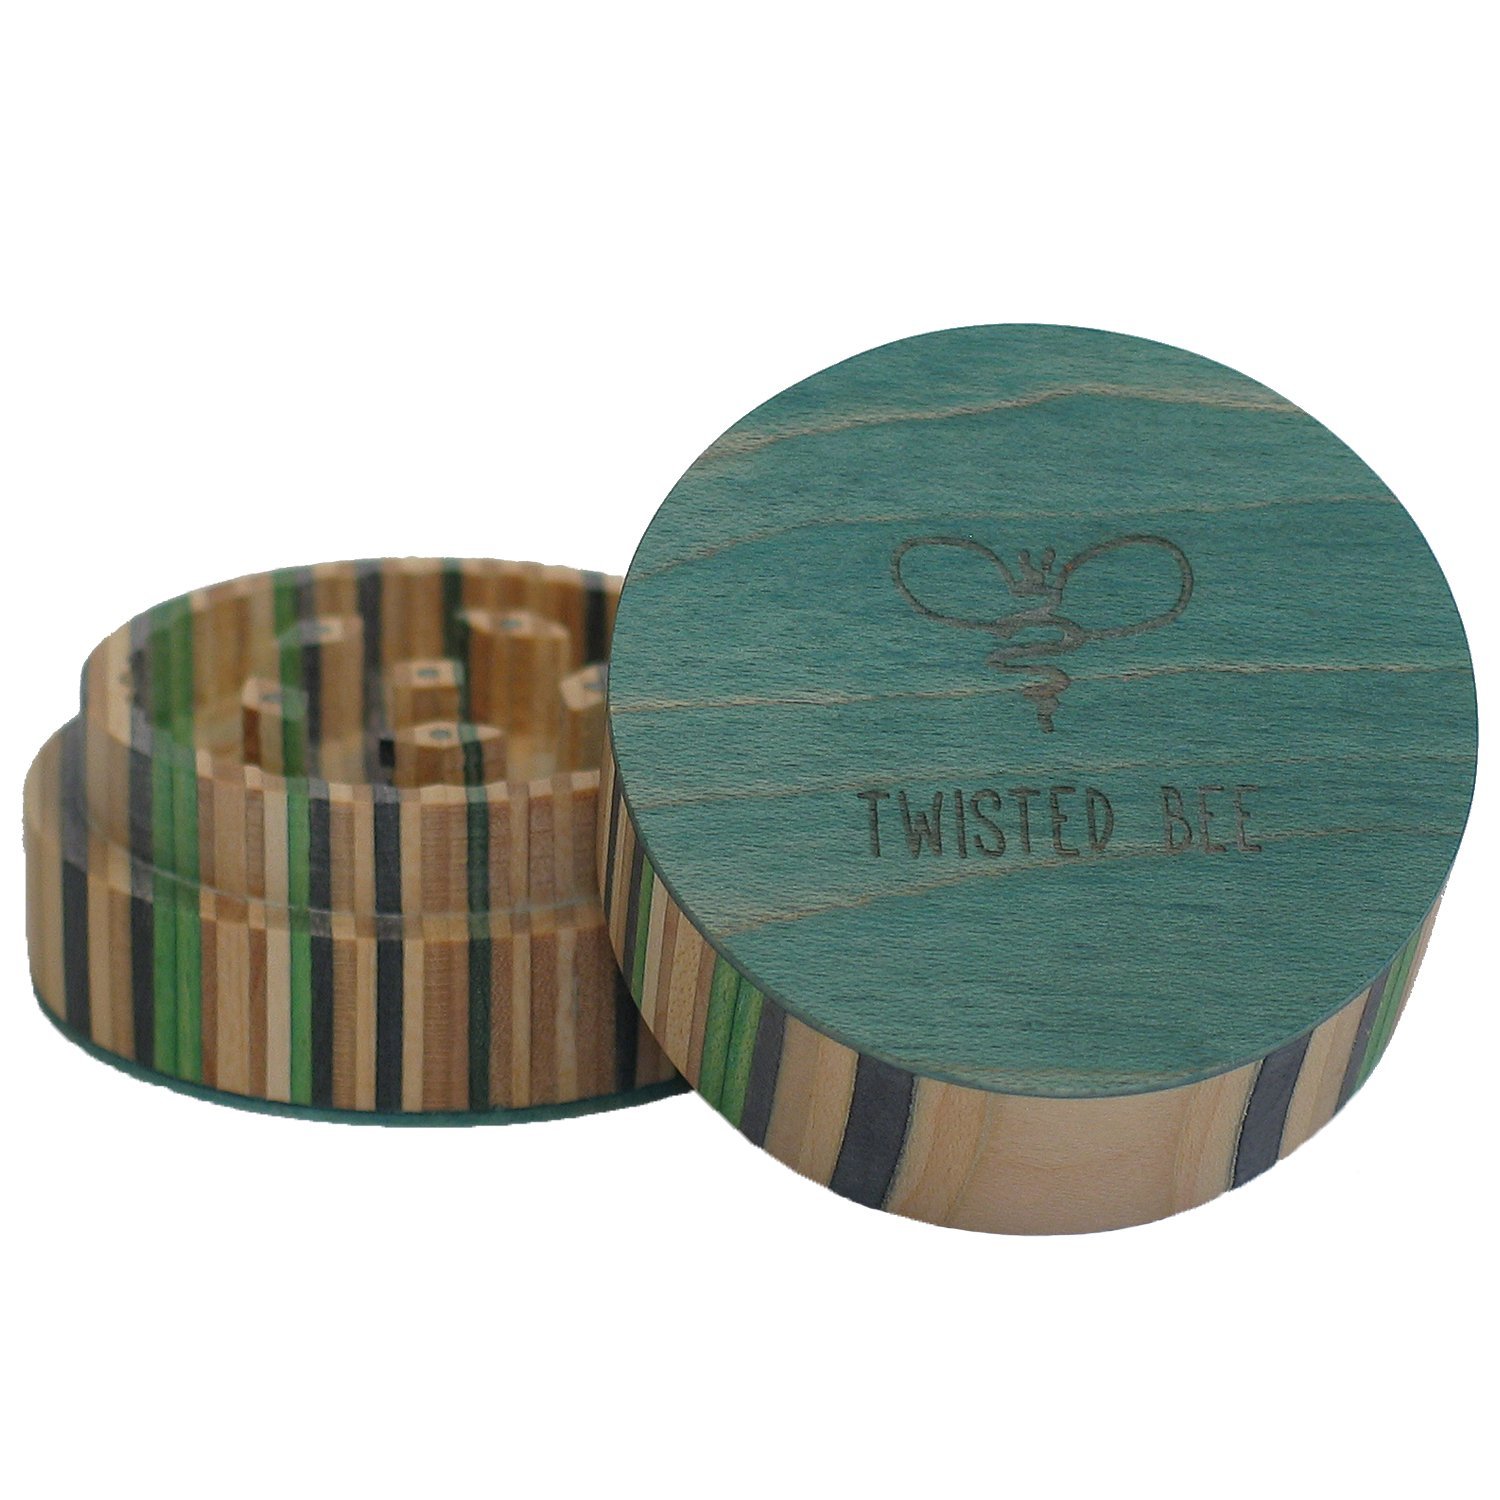 Twisted Bee 2 Piece Wooden Grinder